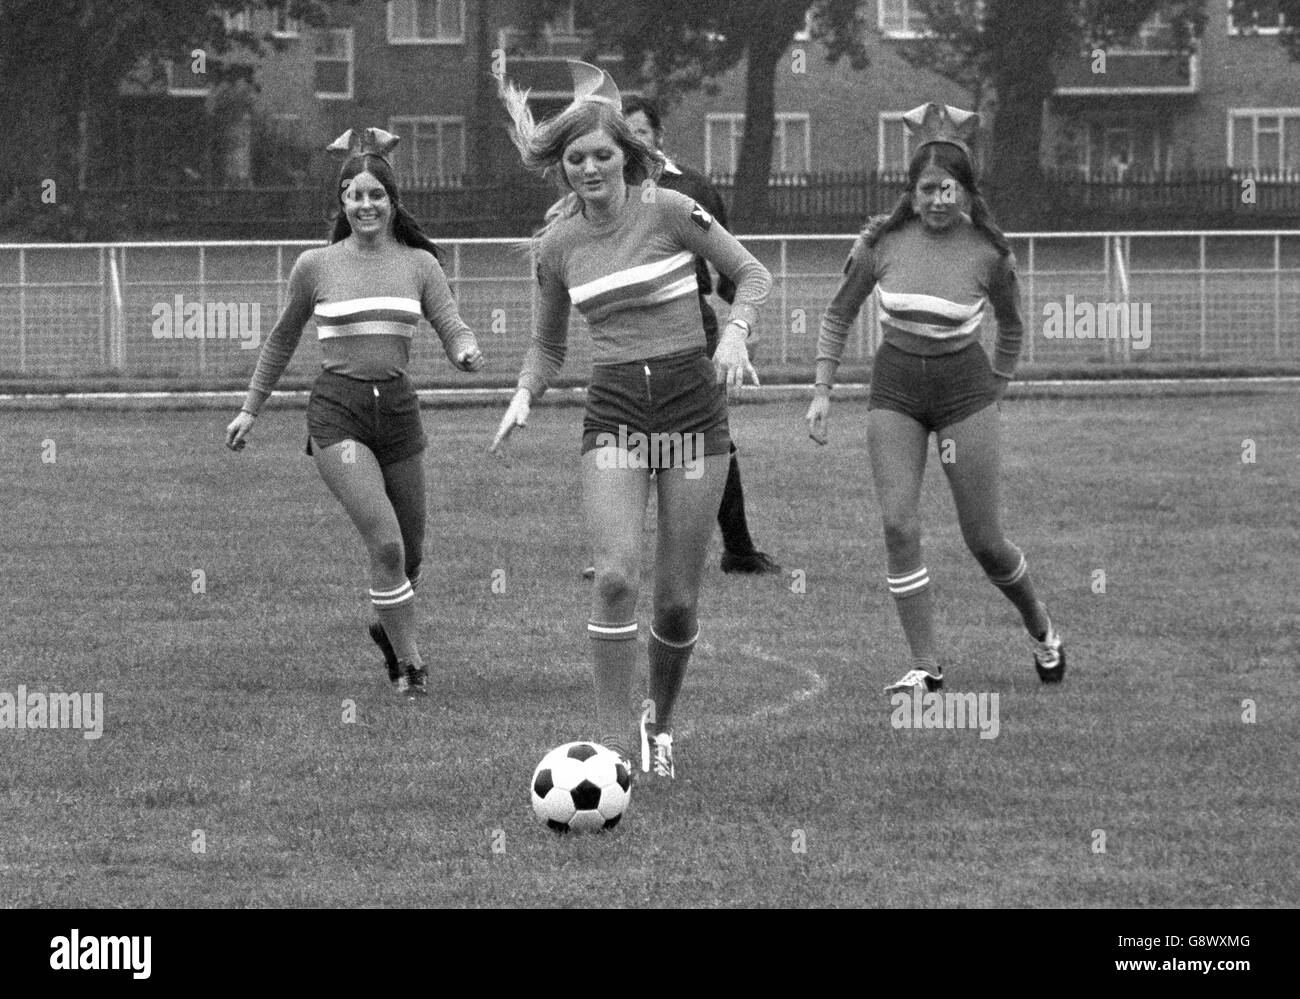 Action from a football match for a team of Playboy Bunnies against 'Apes' from the film Battle for the Planet of the Apes. The game was in aid of the World Wildlife Fund. Stock Photo